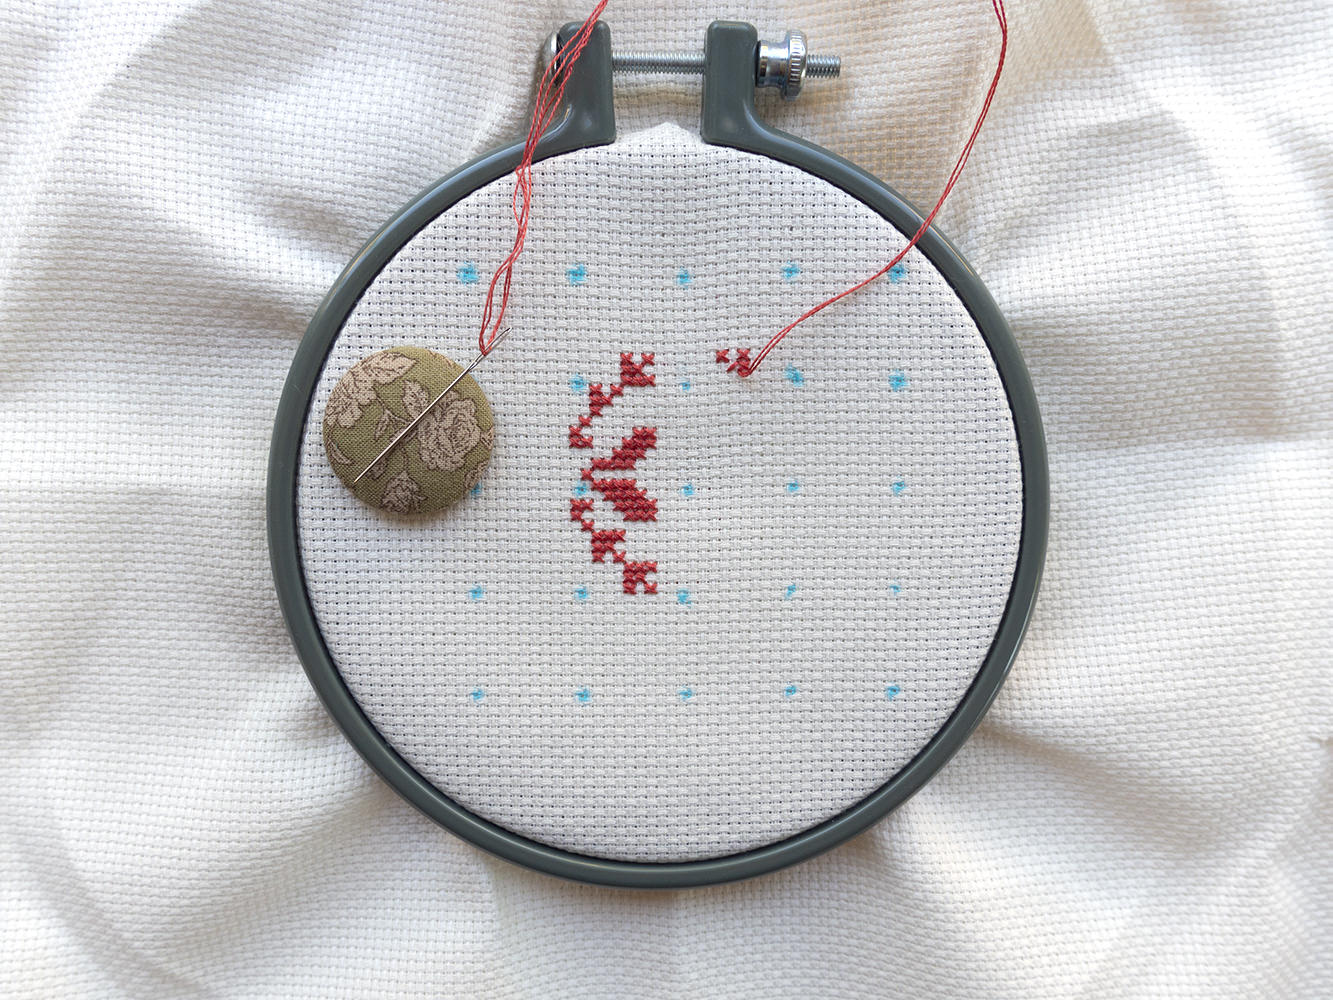 Framing Cross Stitch - 7 Simple Steps To Doing It Properly Yourself?